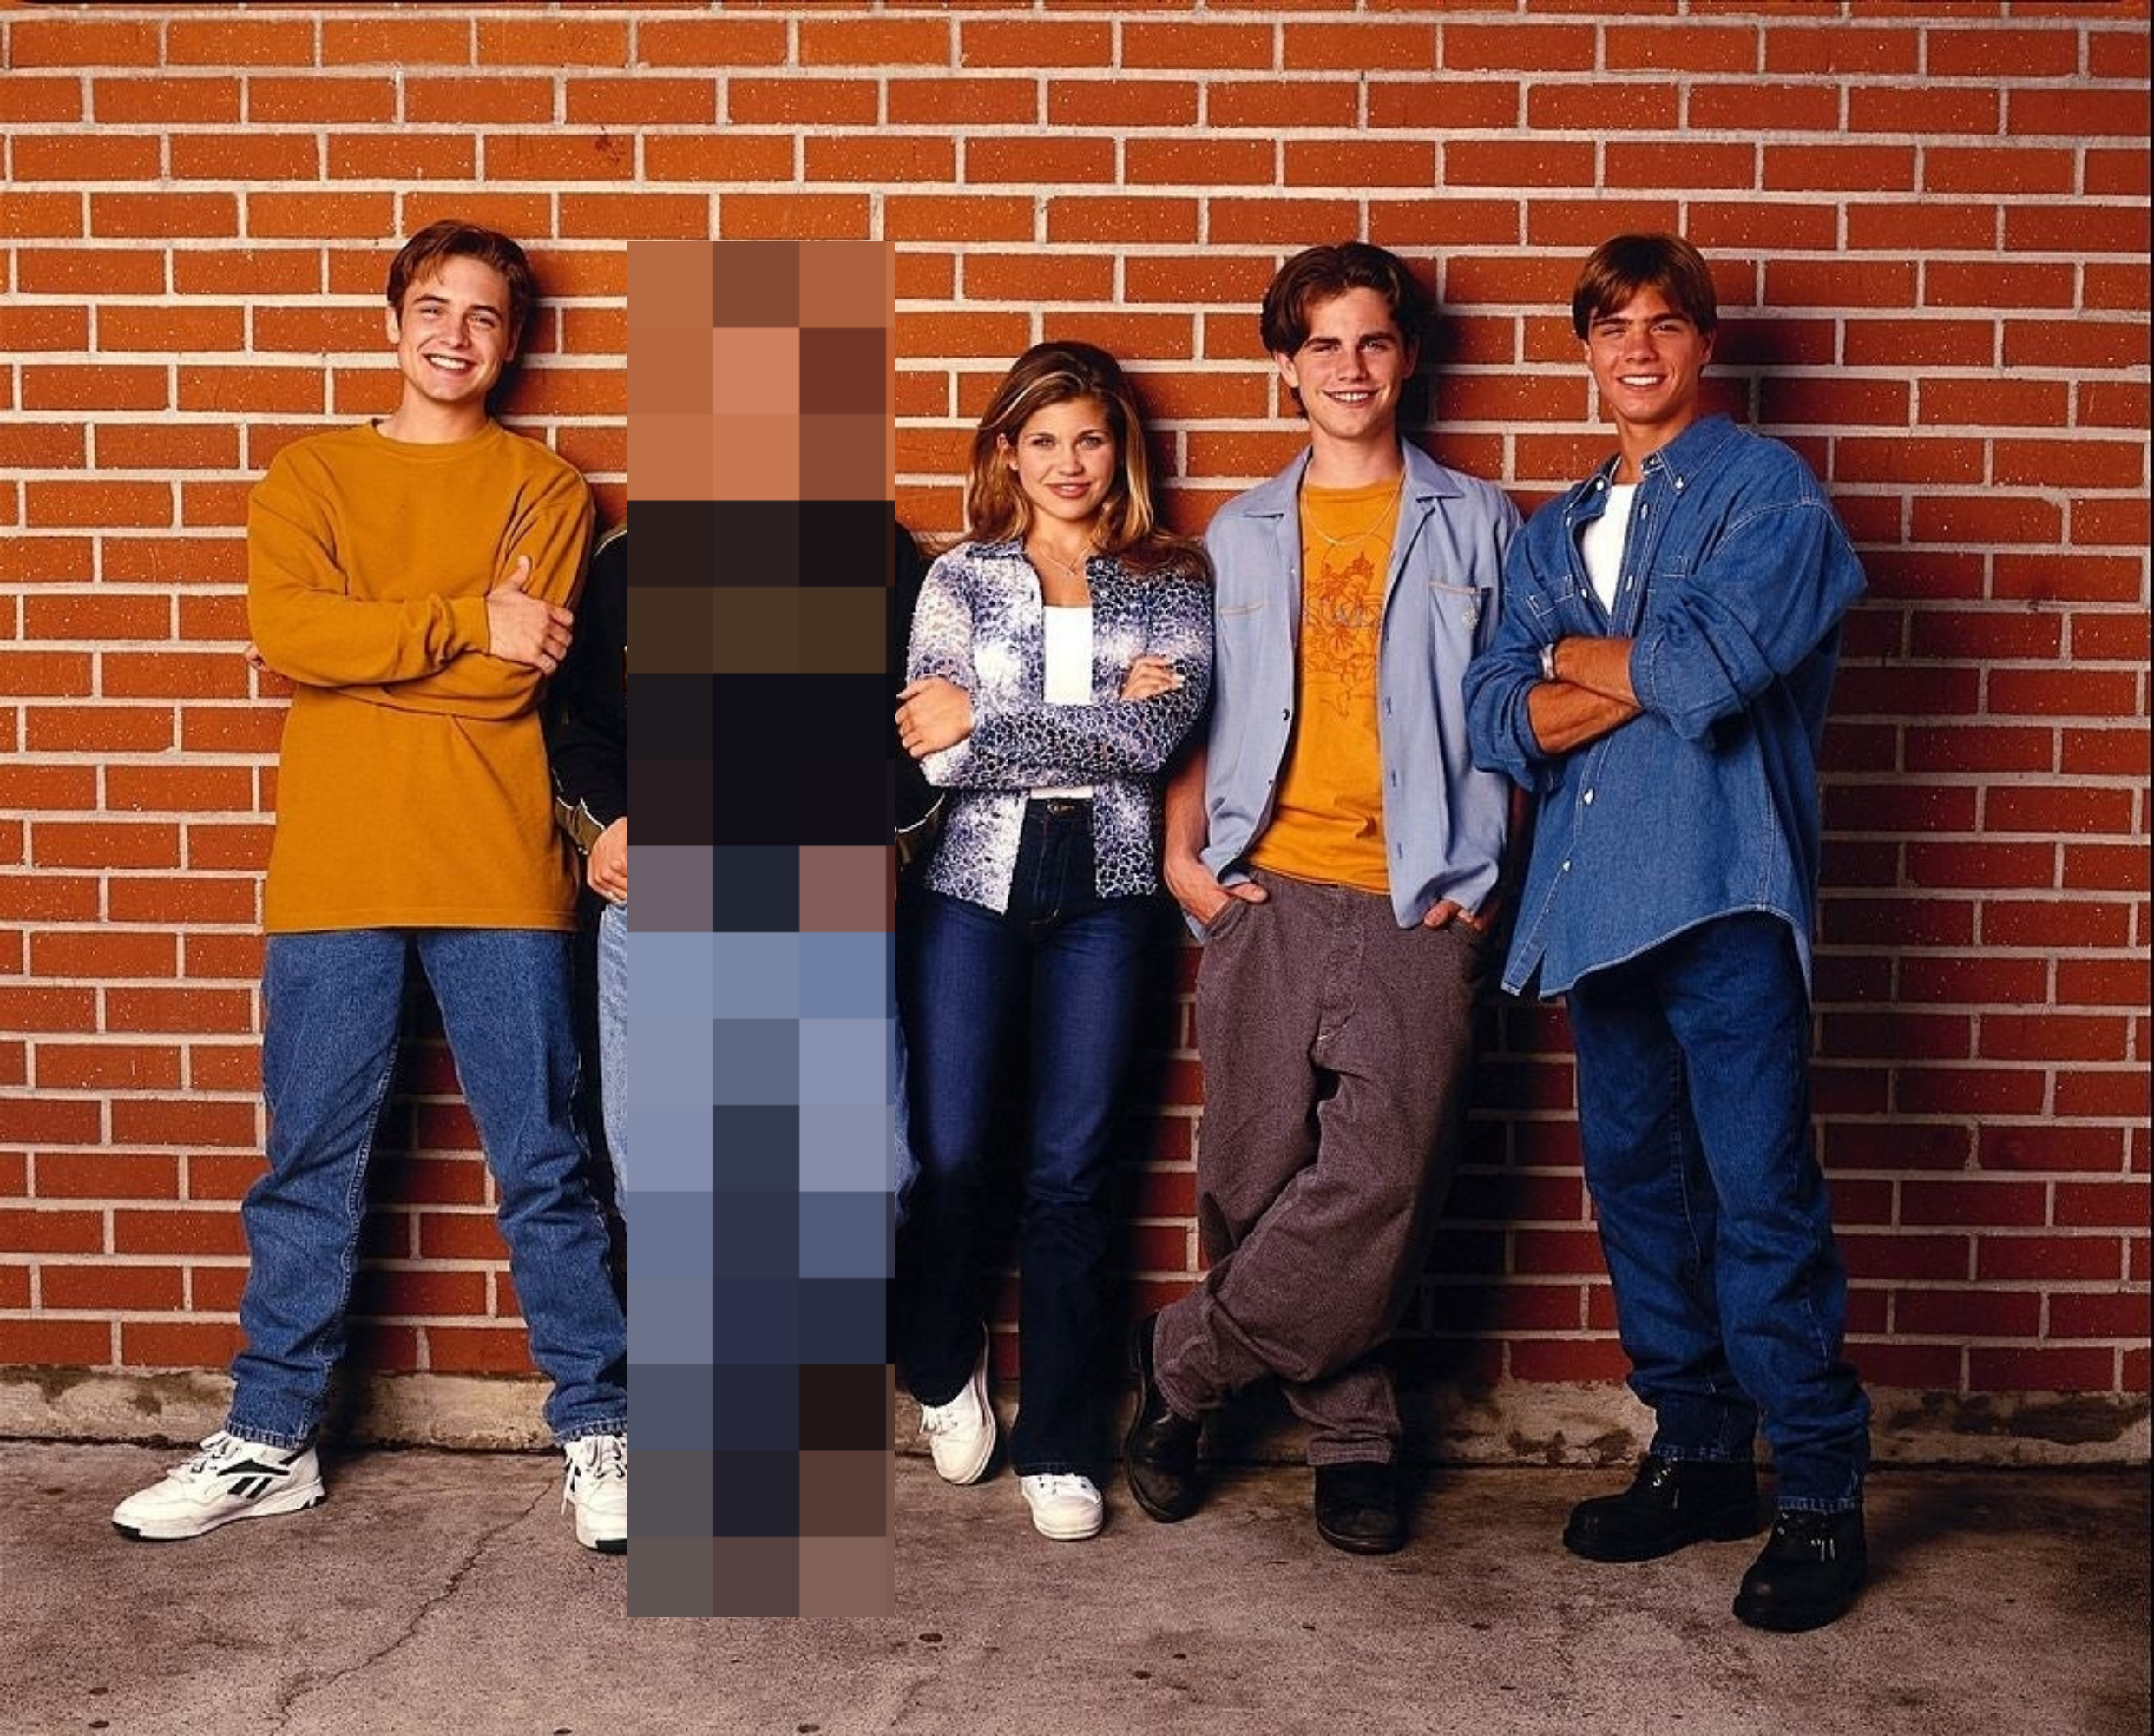 Cast members standing together a wall, with Ben pixelated out